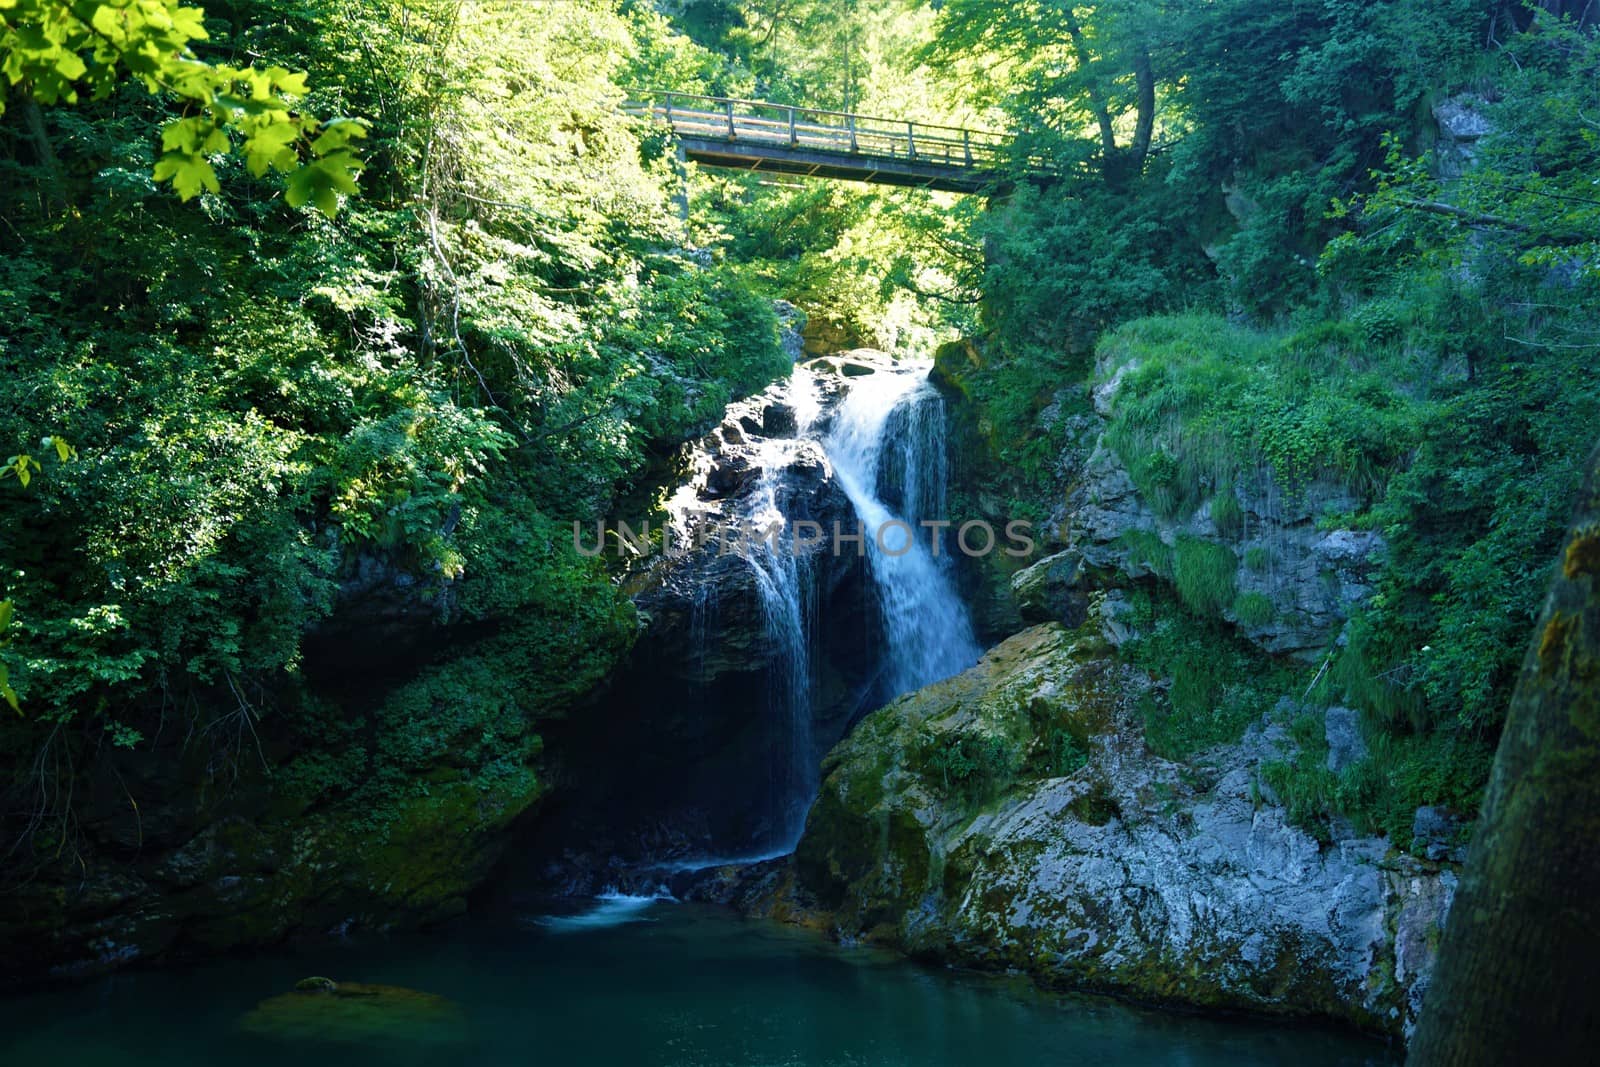 Sum waterfall at the end of Vintgar Gorge in Blejska Dobrava by pisces2386